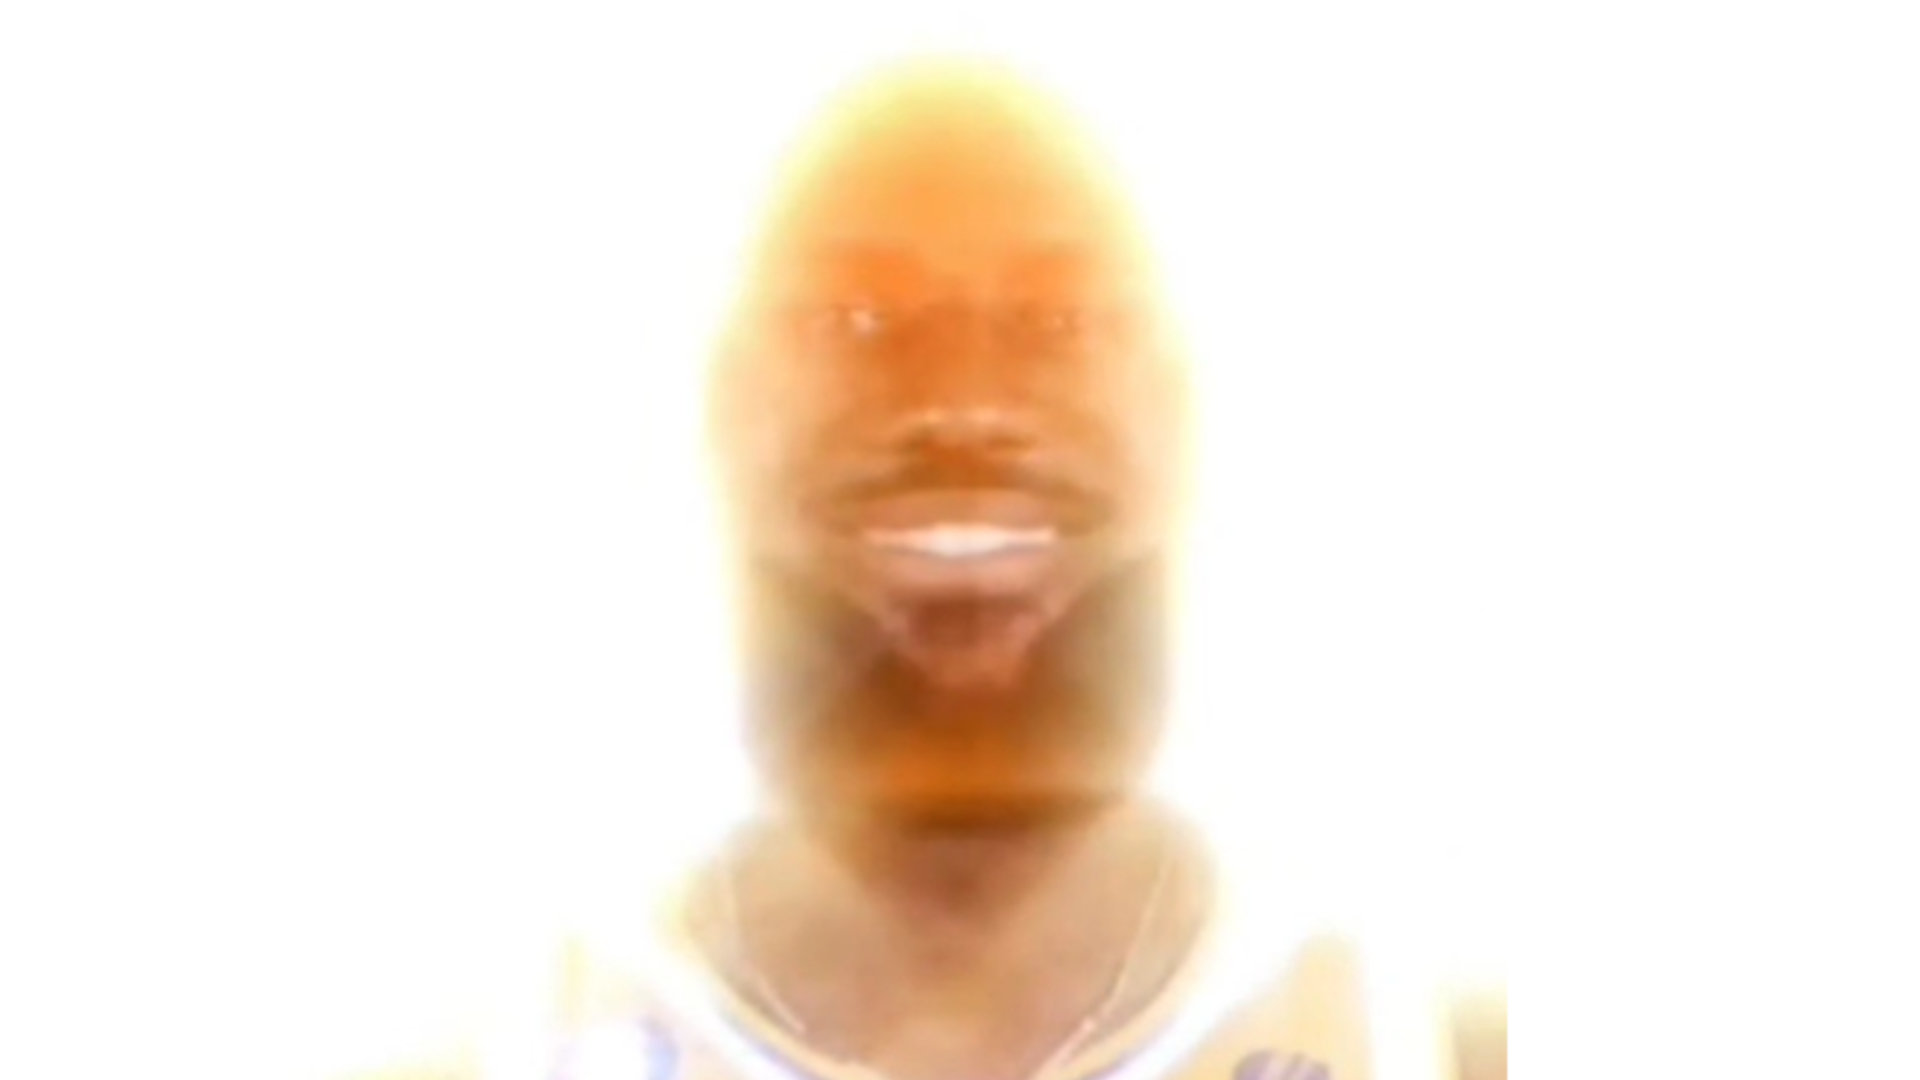 TikTok trend ‘You Are My Sunshine’: What led to LeBron James becoming a meme?